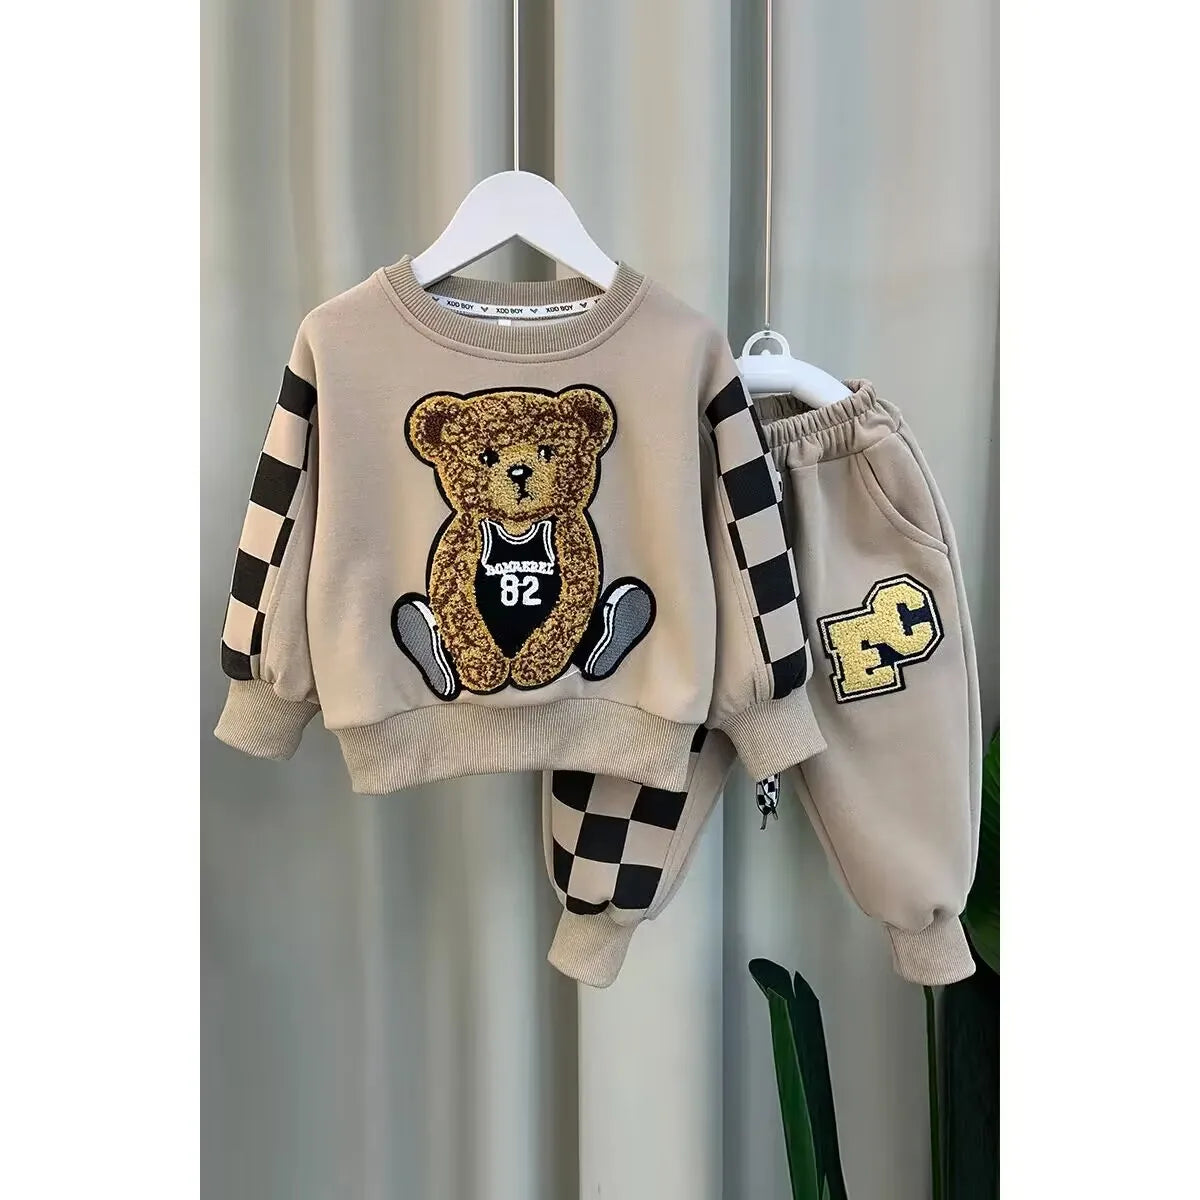 Baby Clothes Set Spring Autumn Children Clothing Sportswear Suits Kids Baby Boys sweater+pant 2PCS Child Training Boy Clothes